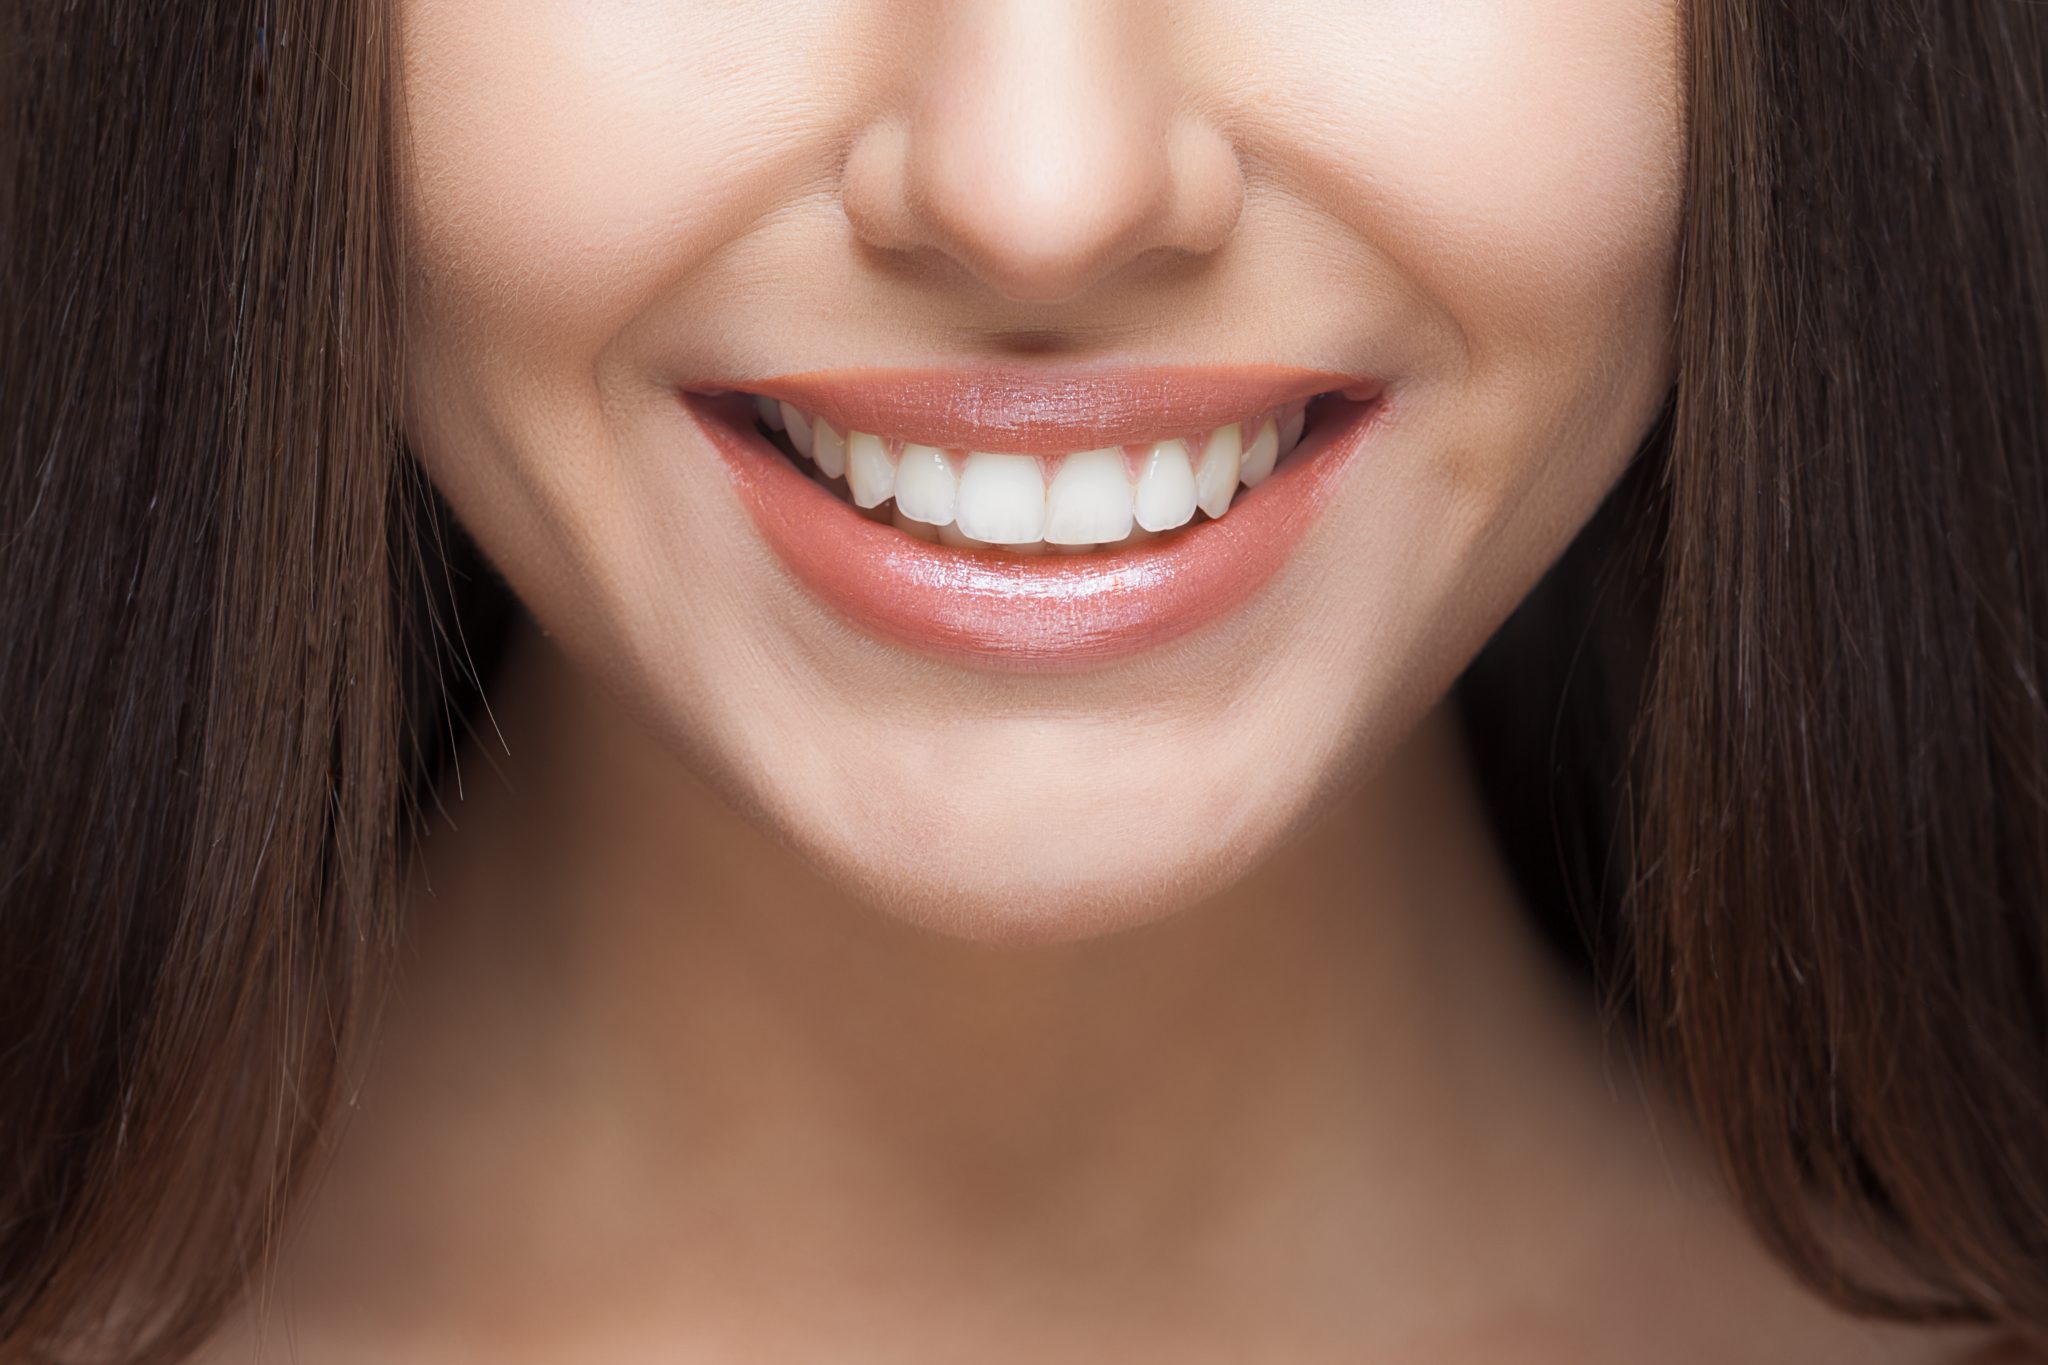 Wide Smiling White Teeth of a Woman